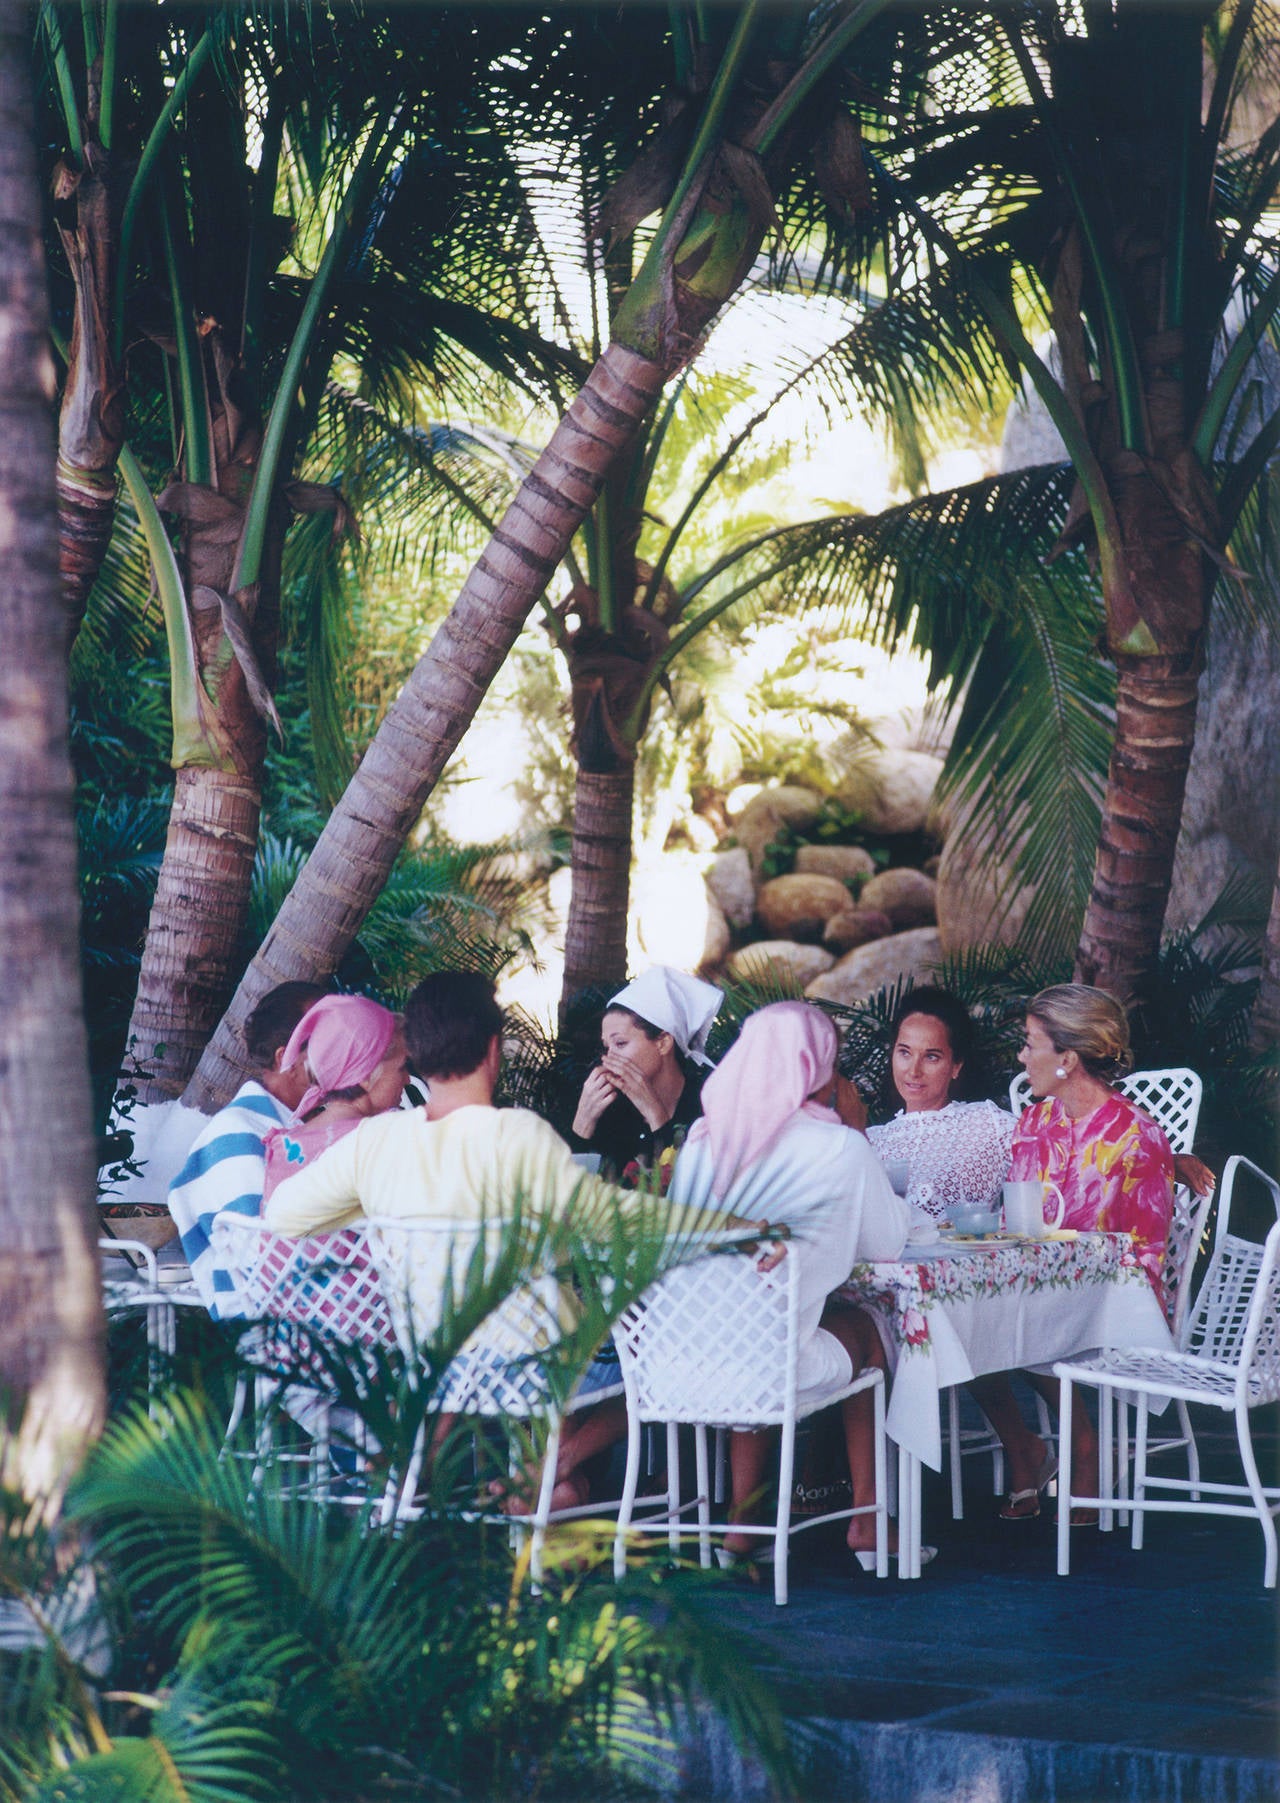 Slim Aarons Figurative Photograph - Oberon's Lunch (Aarons Estate Edition)